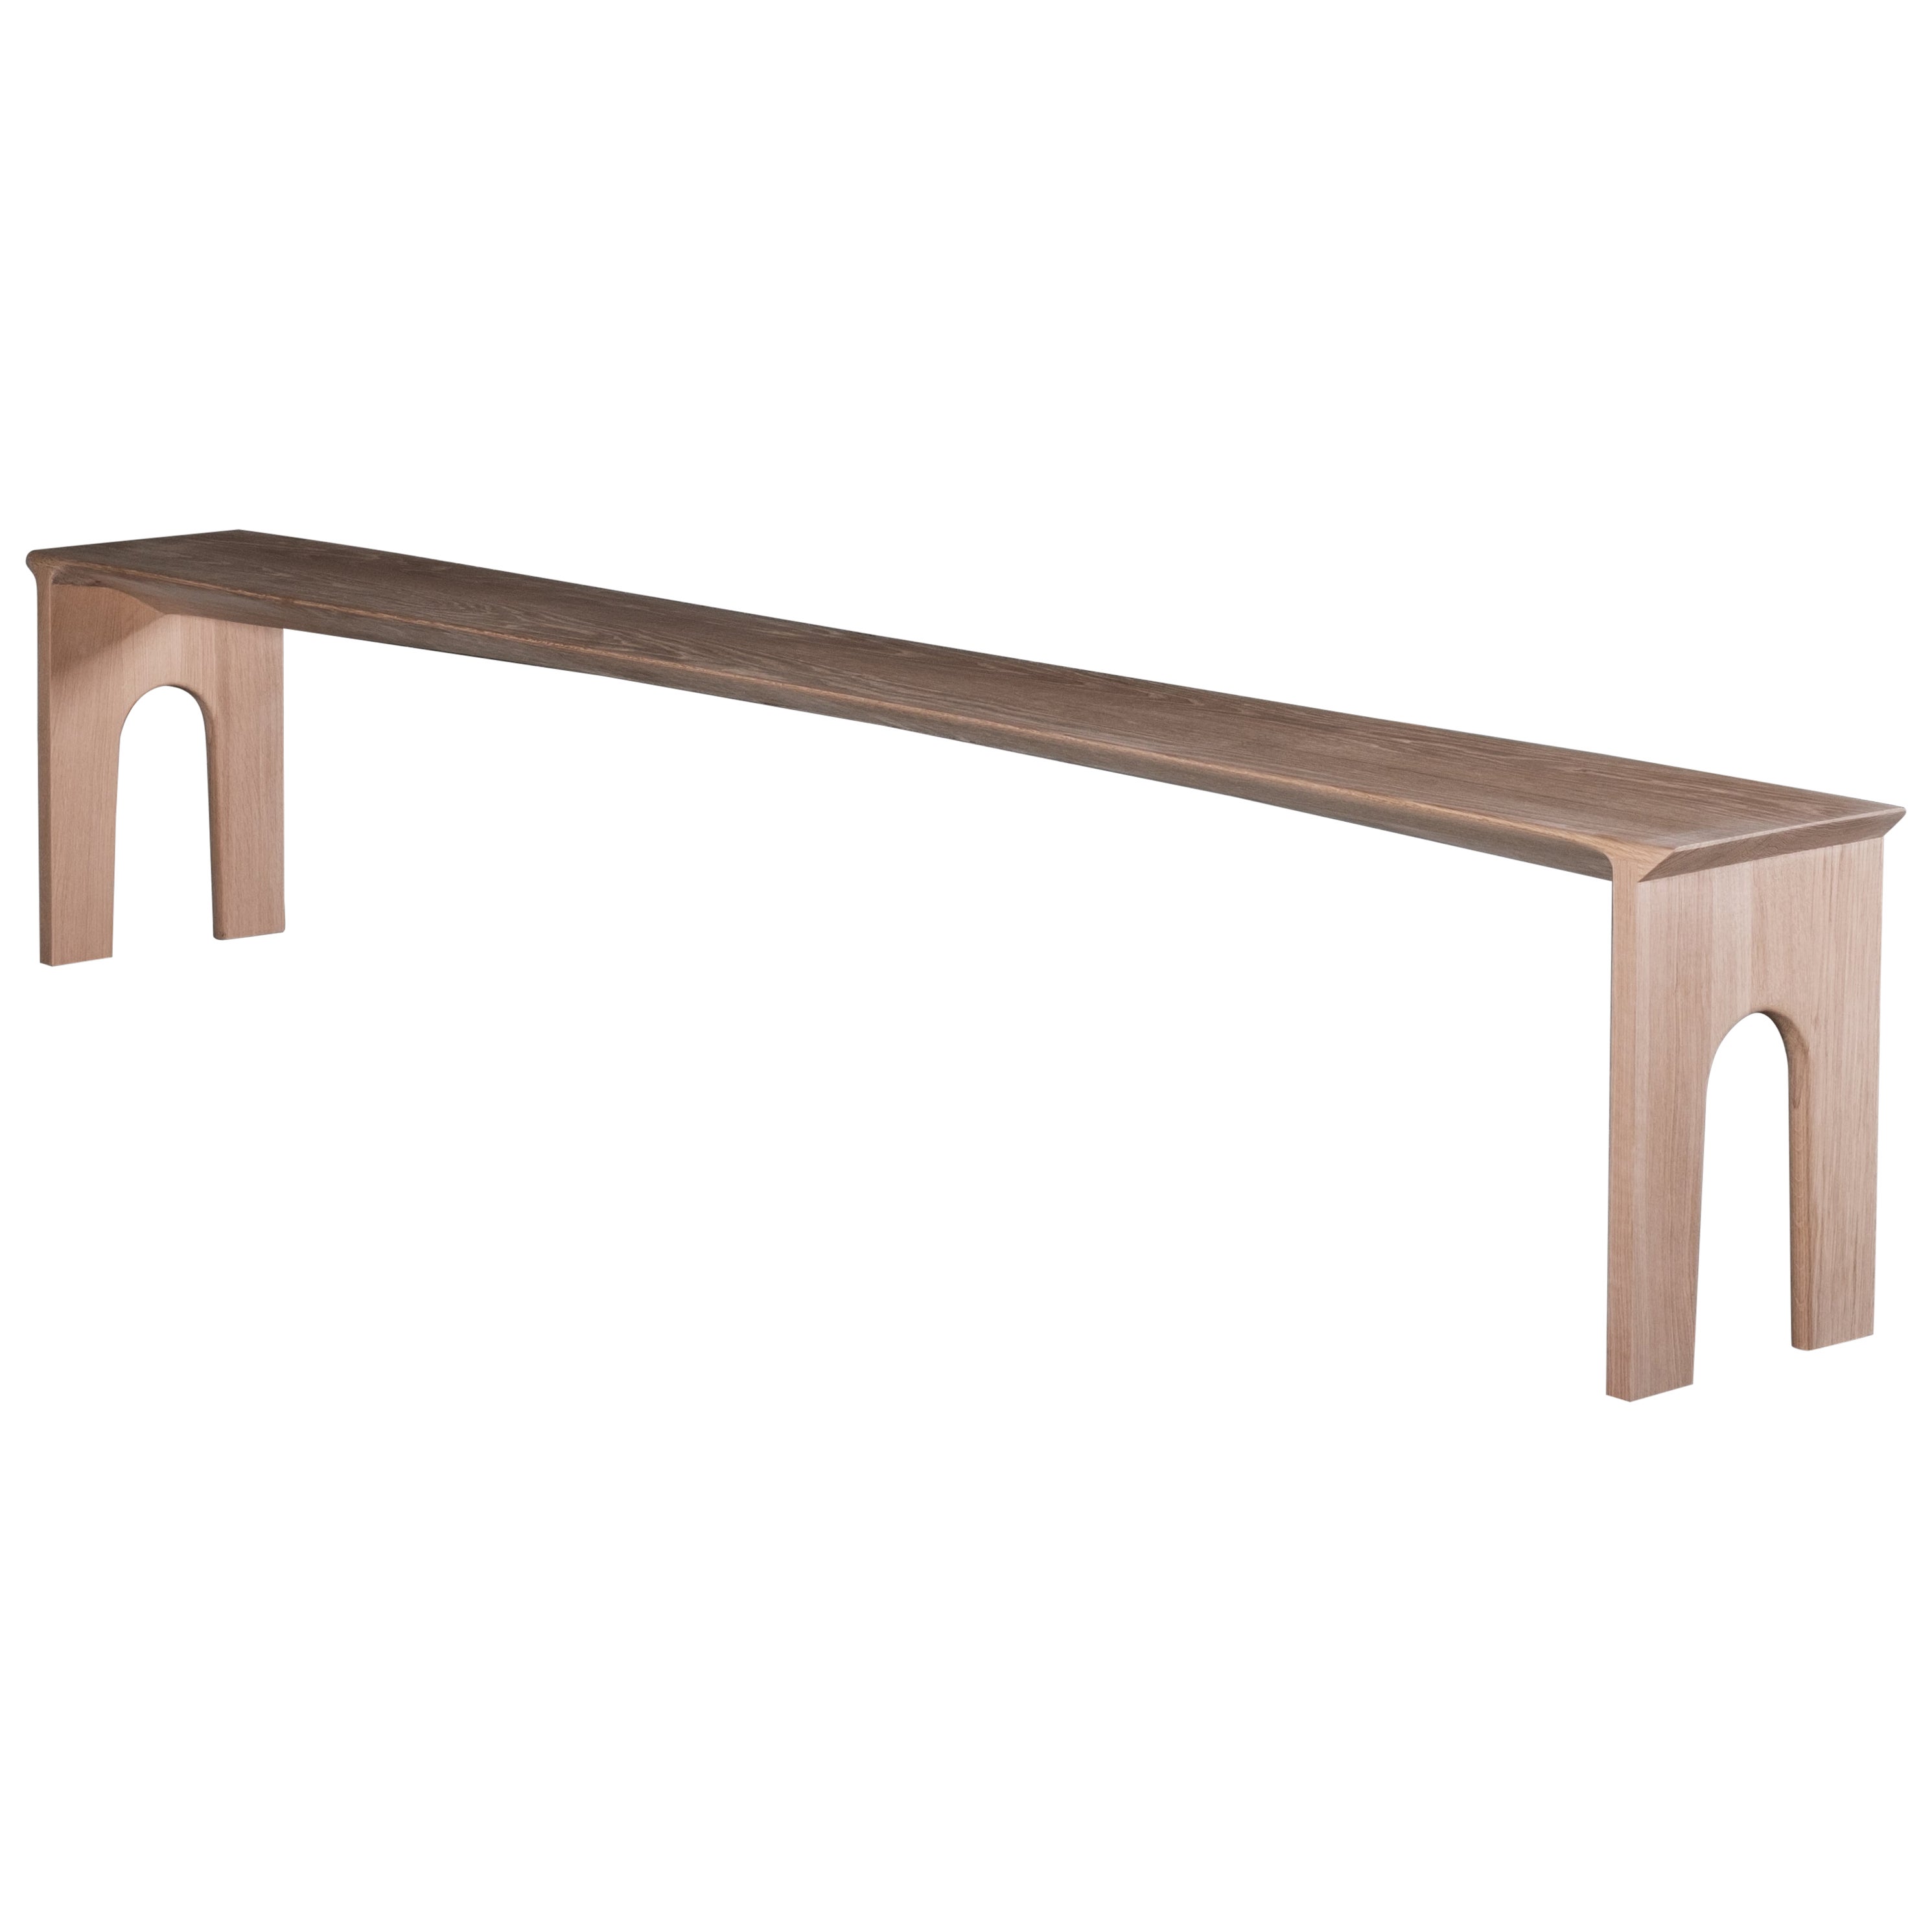 Contemporary Nude Solid Oak Bench Large, Kuro Collection, by Lukas Cober  For Sale at 1stDibs